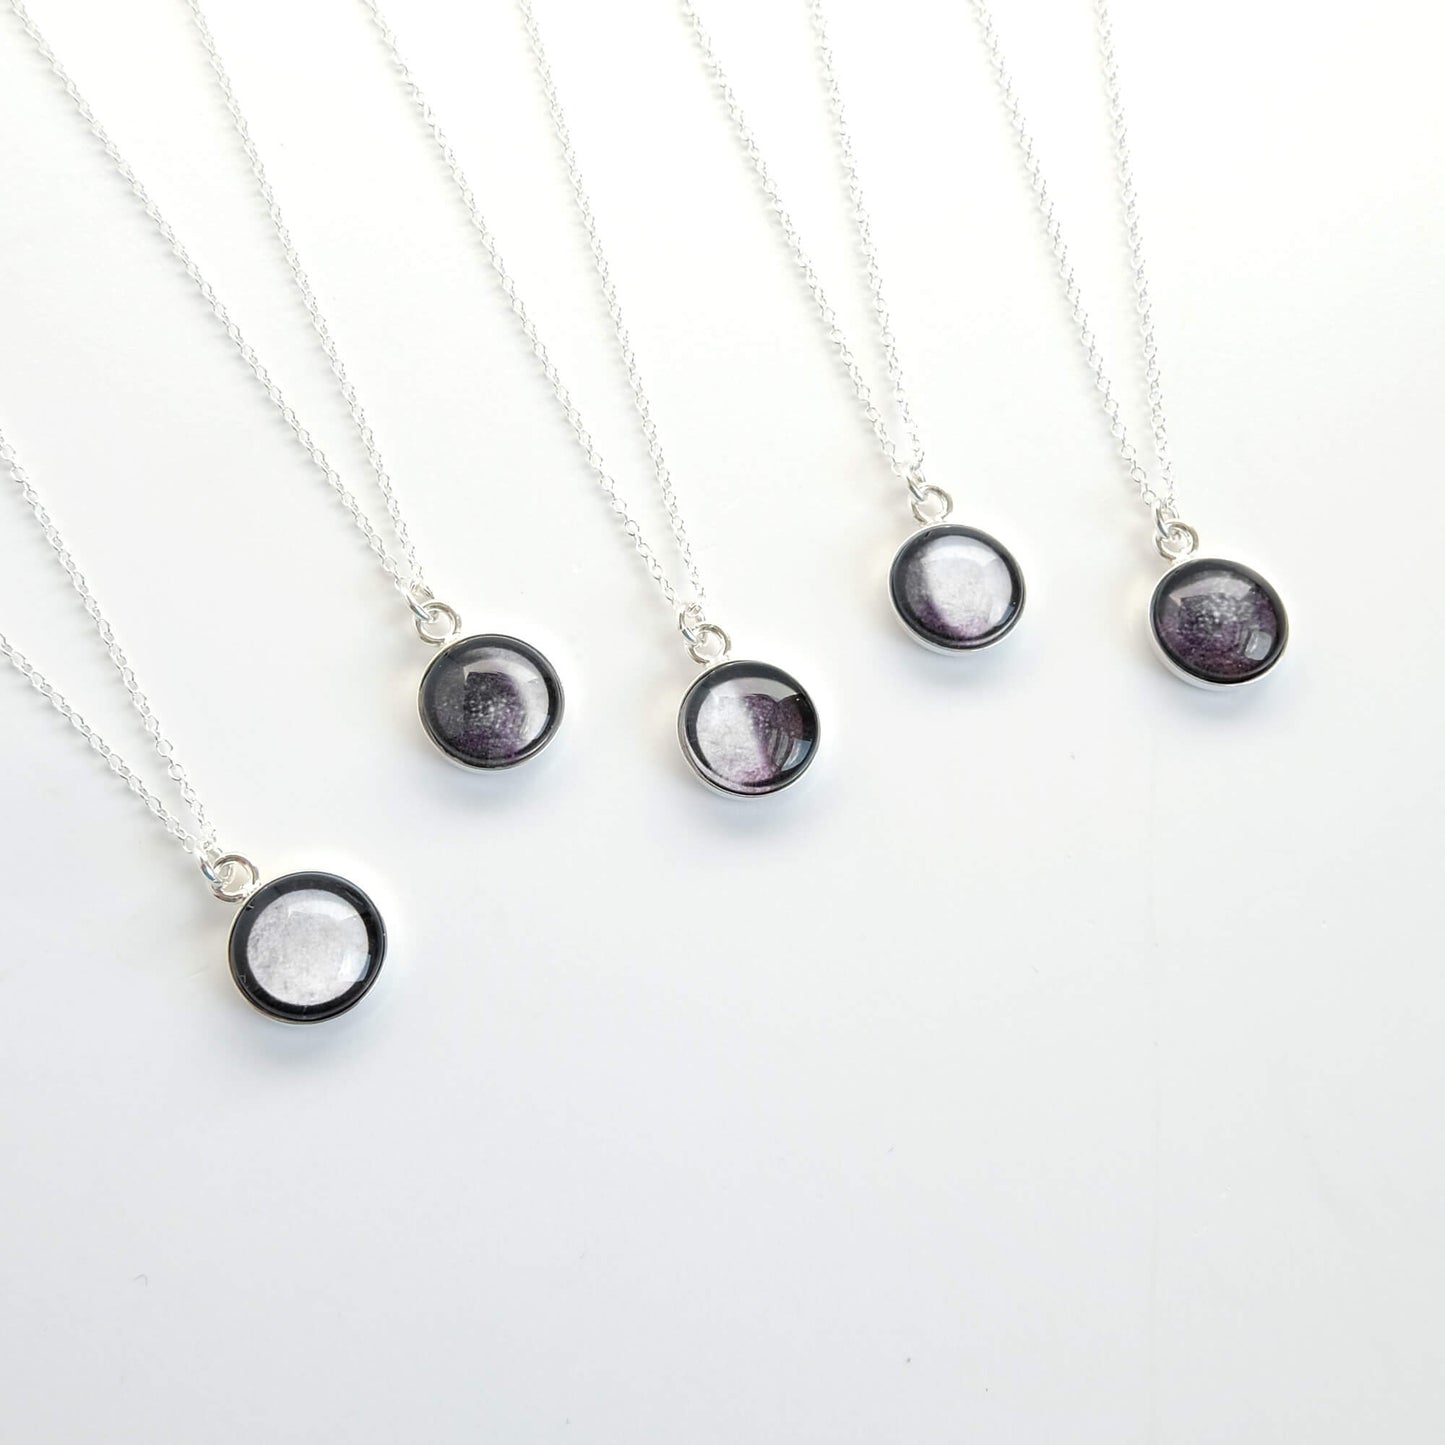 Personalised Moon Phase Necklace